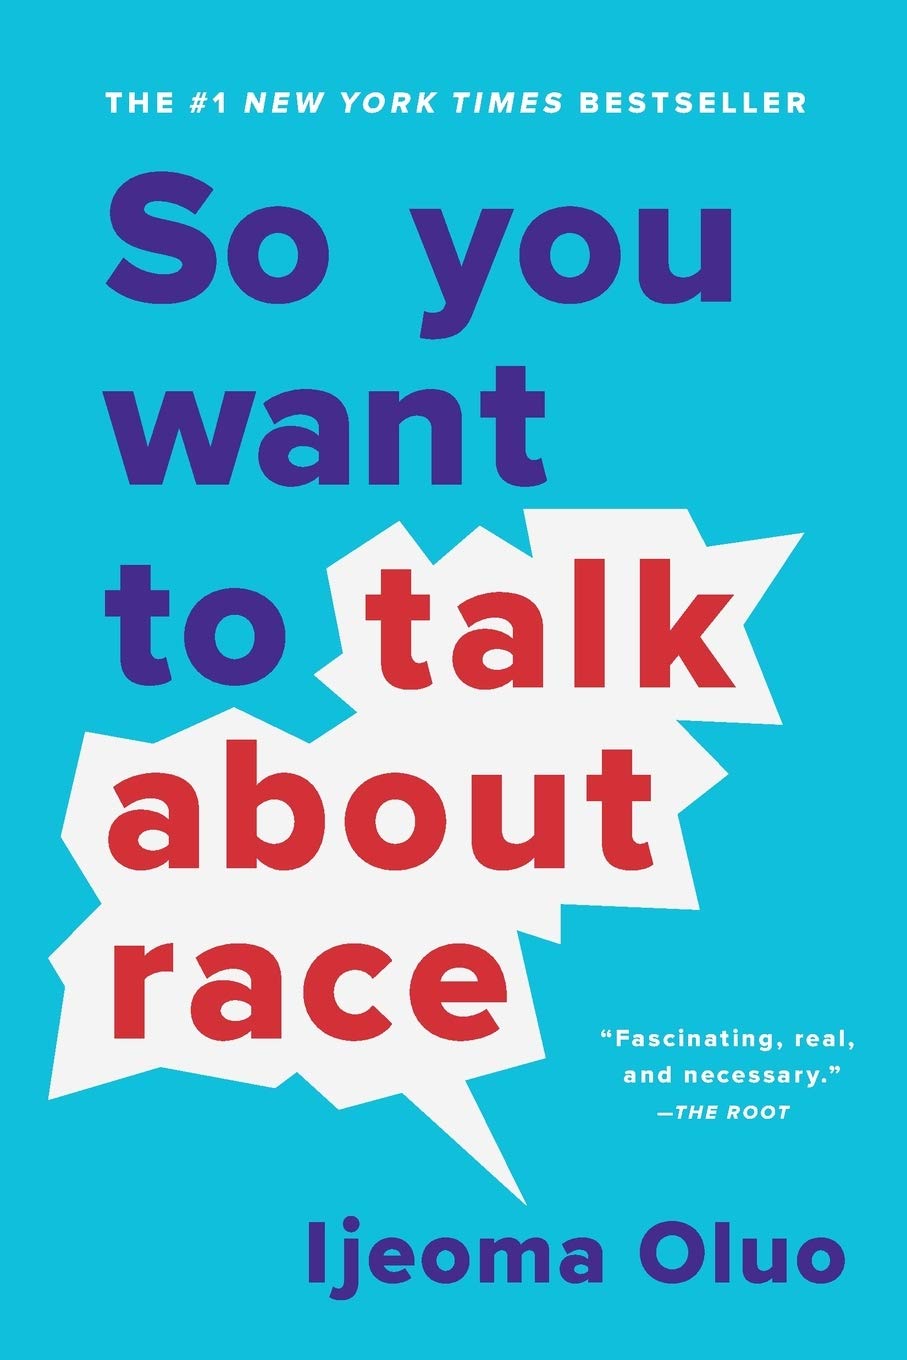 So you want to talk about race (2018)